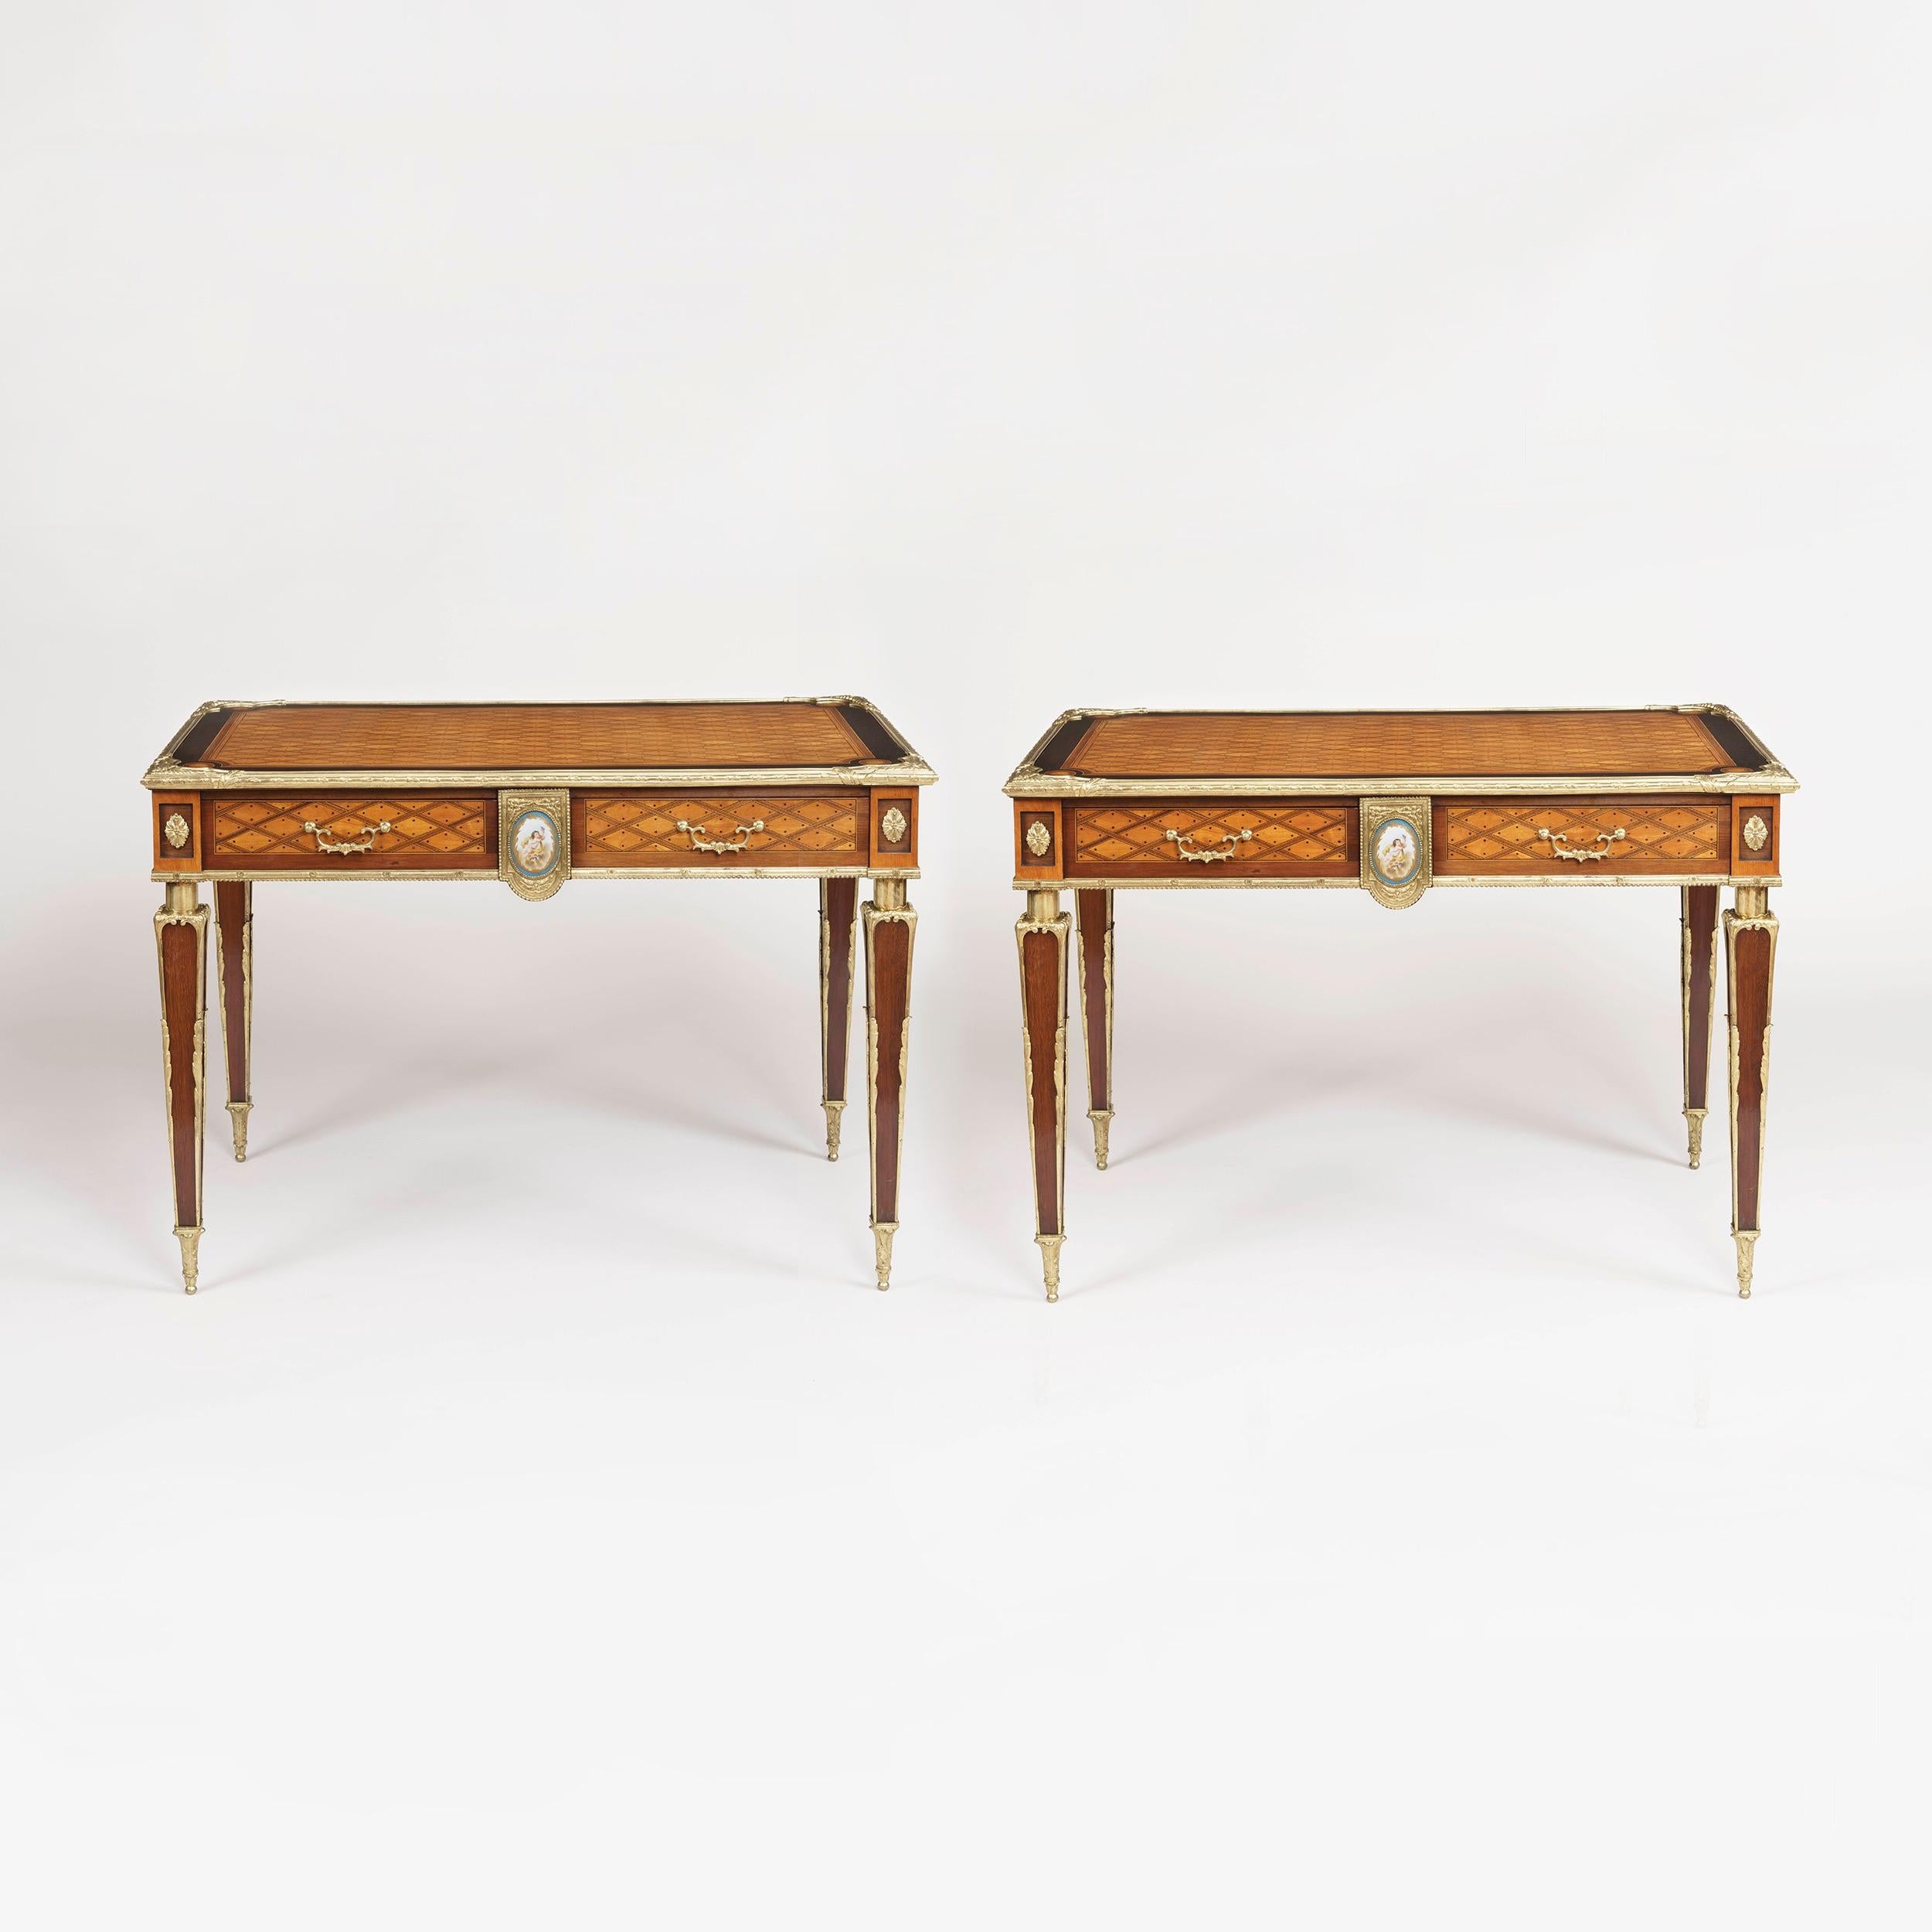 A rare pair of tables attributed to Donald Ross of London

Constructed in citronnier, ebony and harewood, and dressed with a porcelain plaque in the 'Sevres' manner, and adorned with very fine bronze mounts. Throughout, the 'trellis and dot'